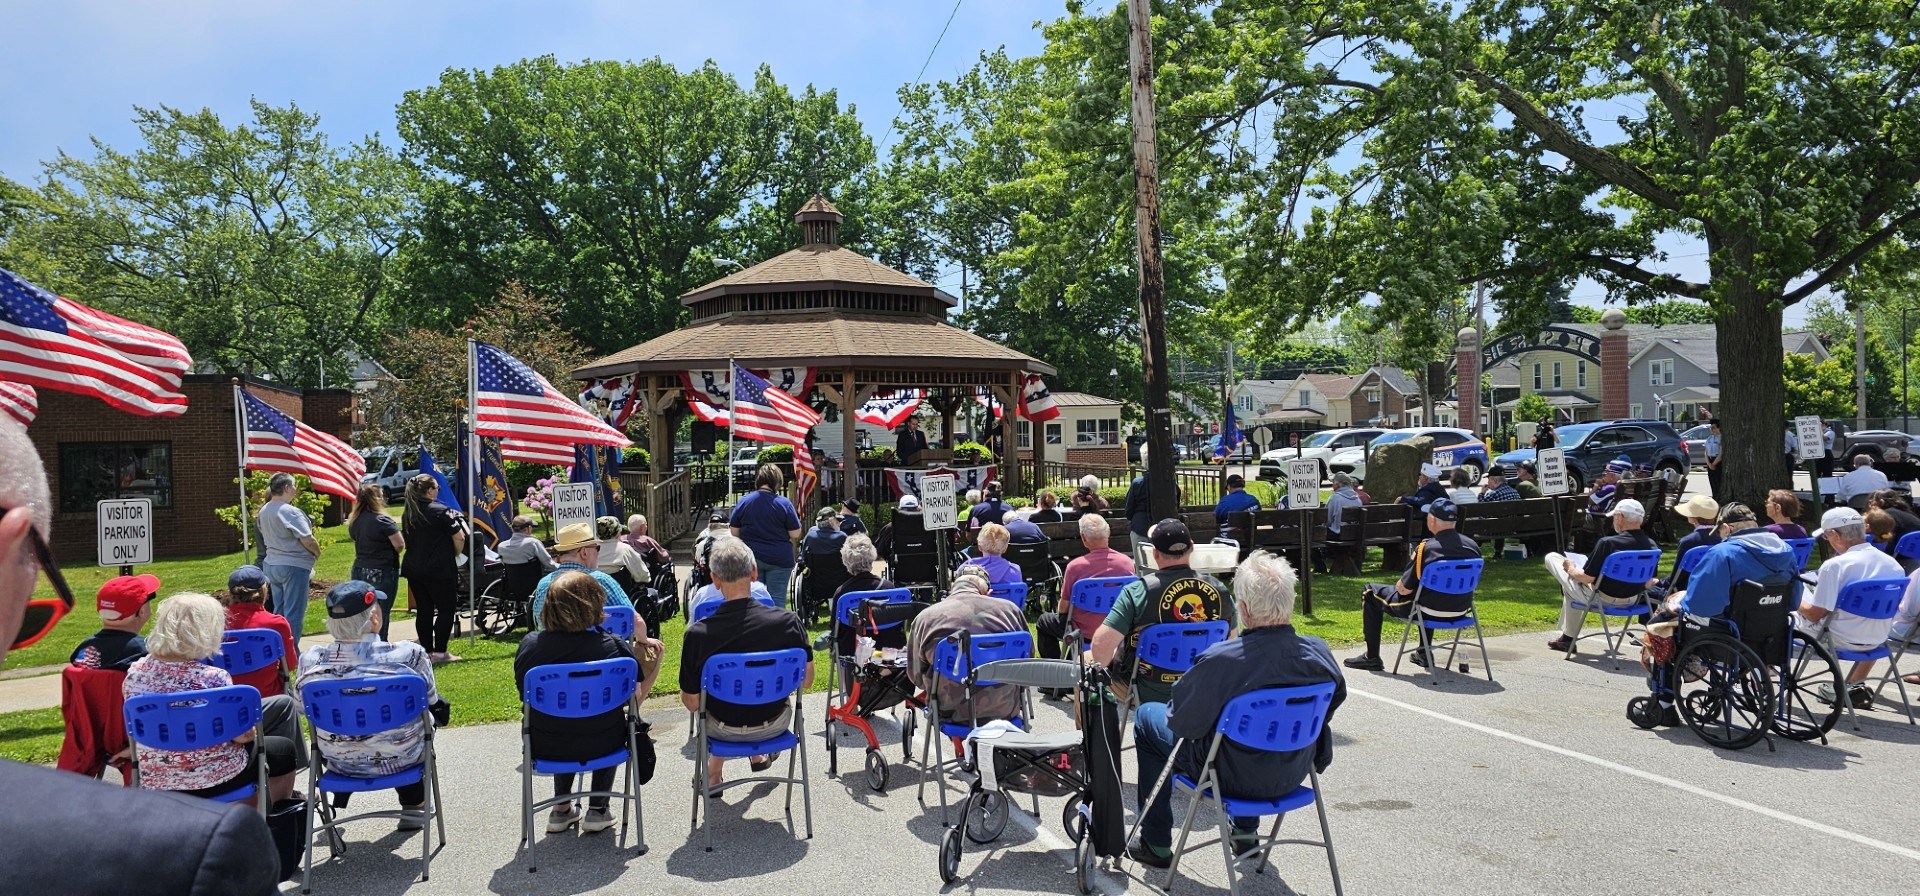 Pennsylvania Soldiers and Sailors Home Hosts Memorial Day Ceremony